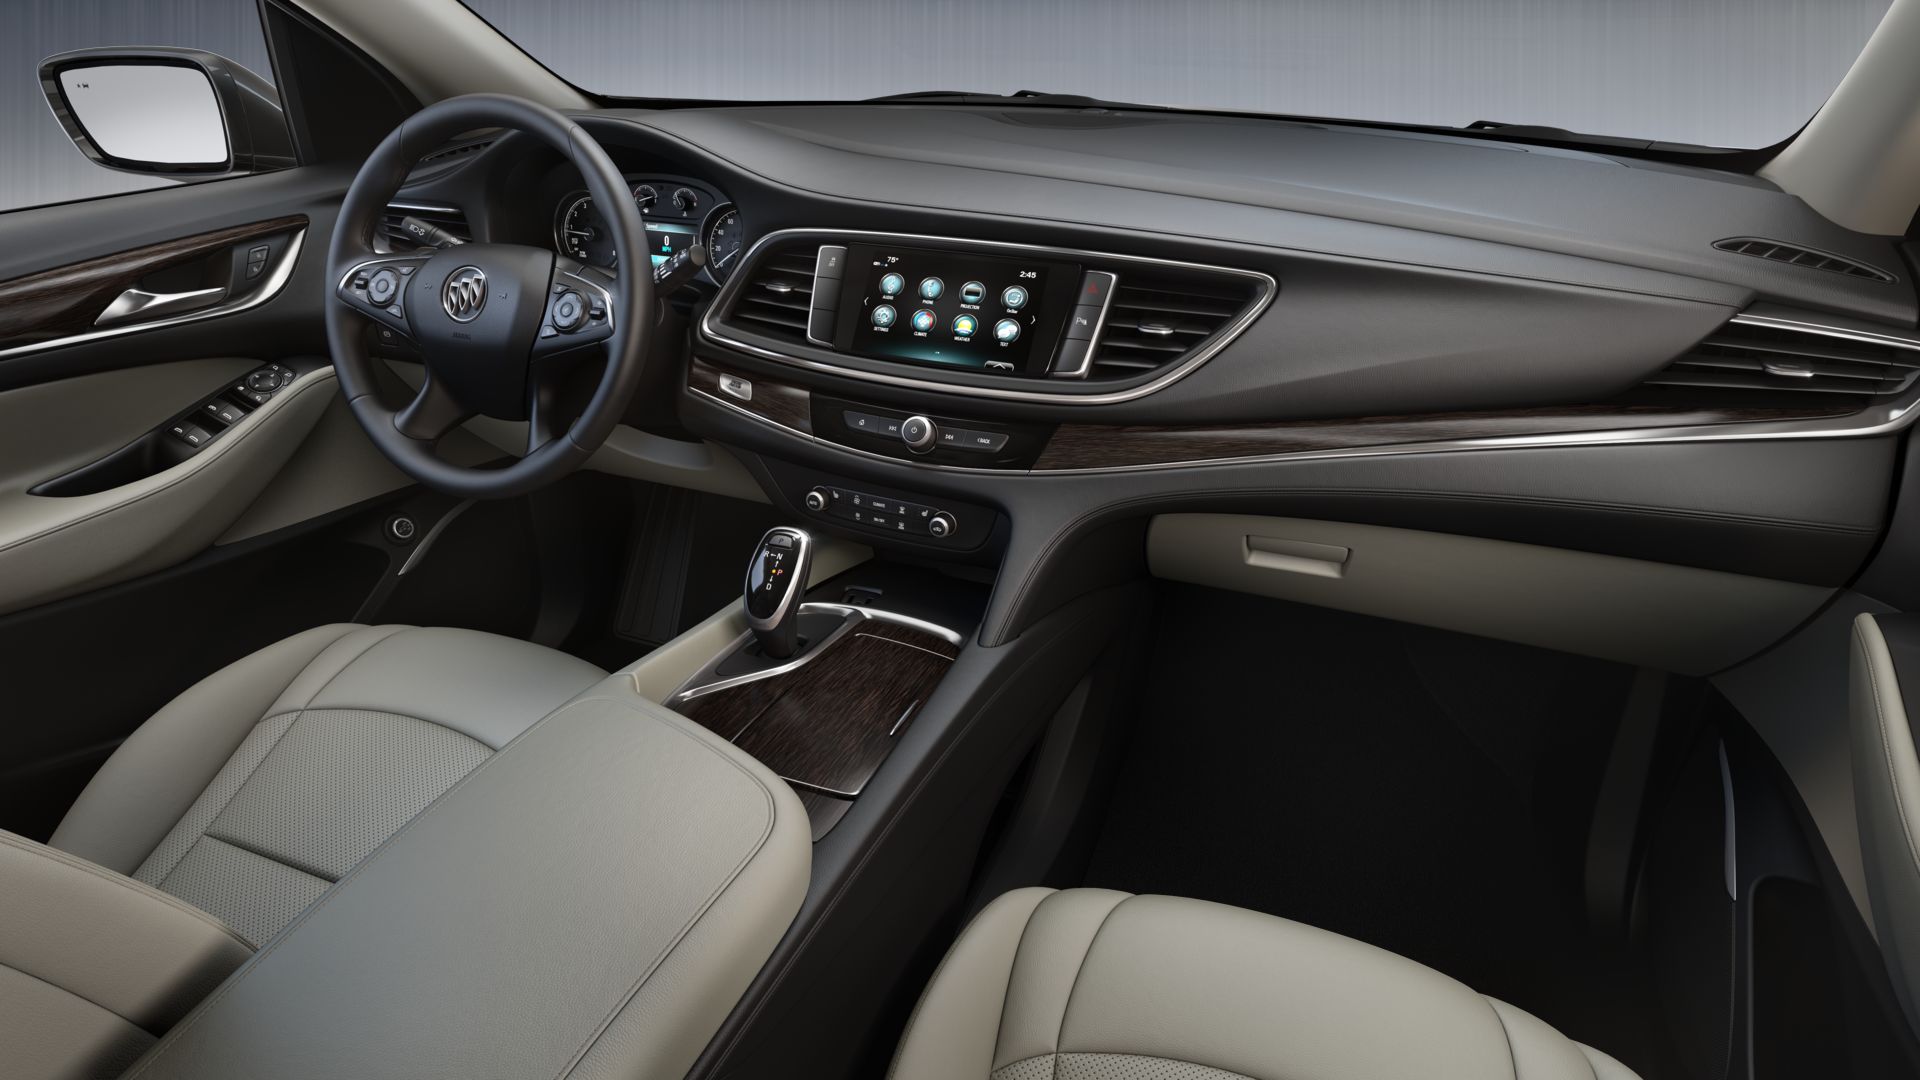 2019 Buick Enclave Interior Colors Gm Authority